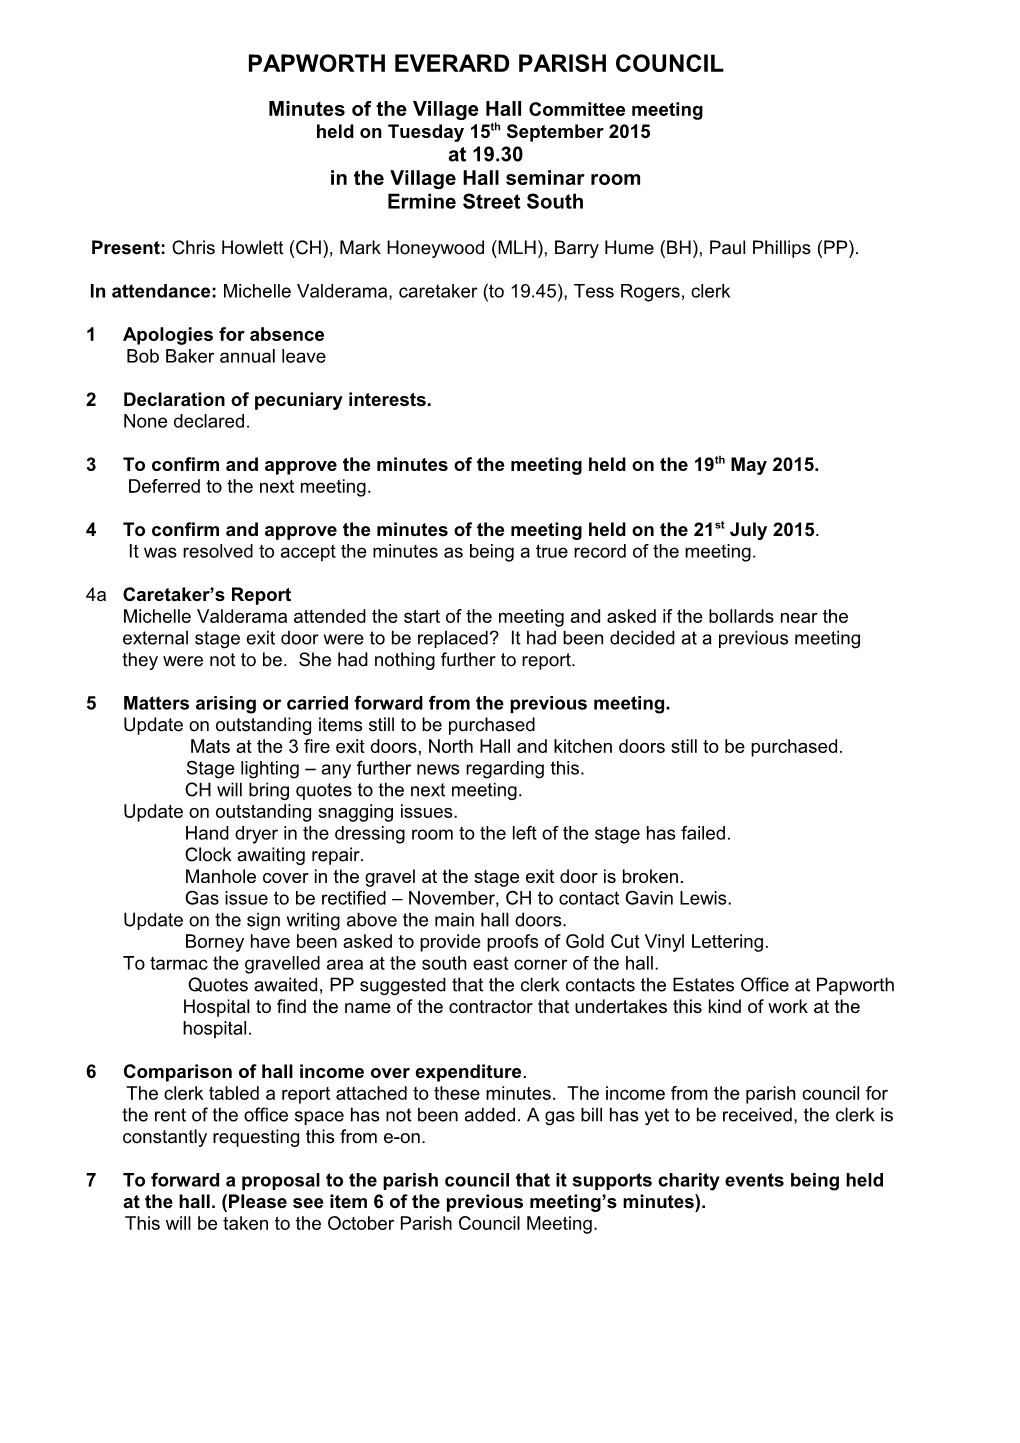 Minutes of the Village Hallcommittee Meeting